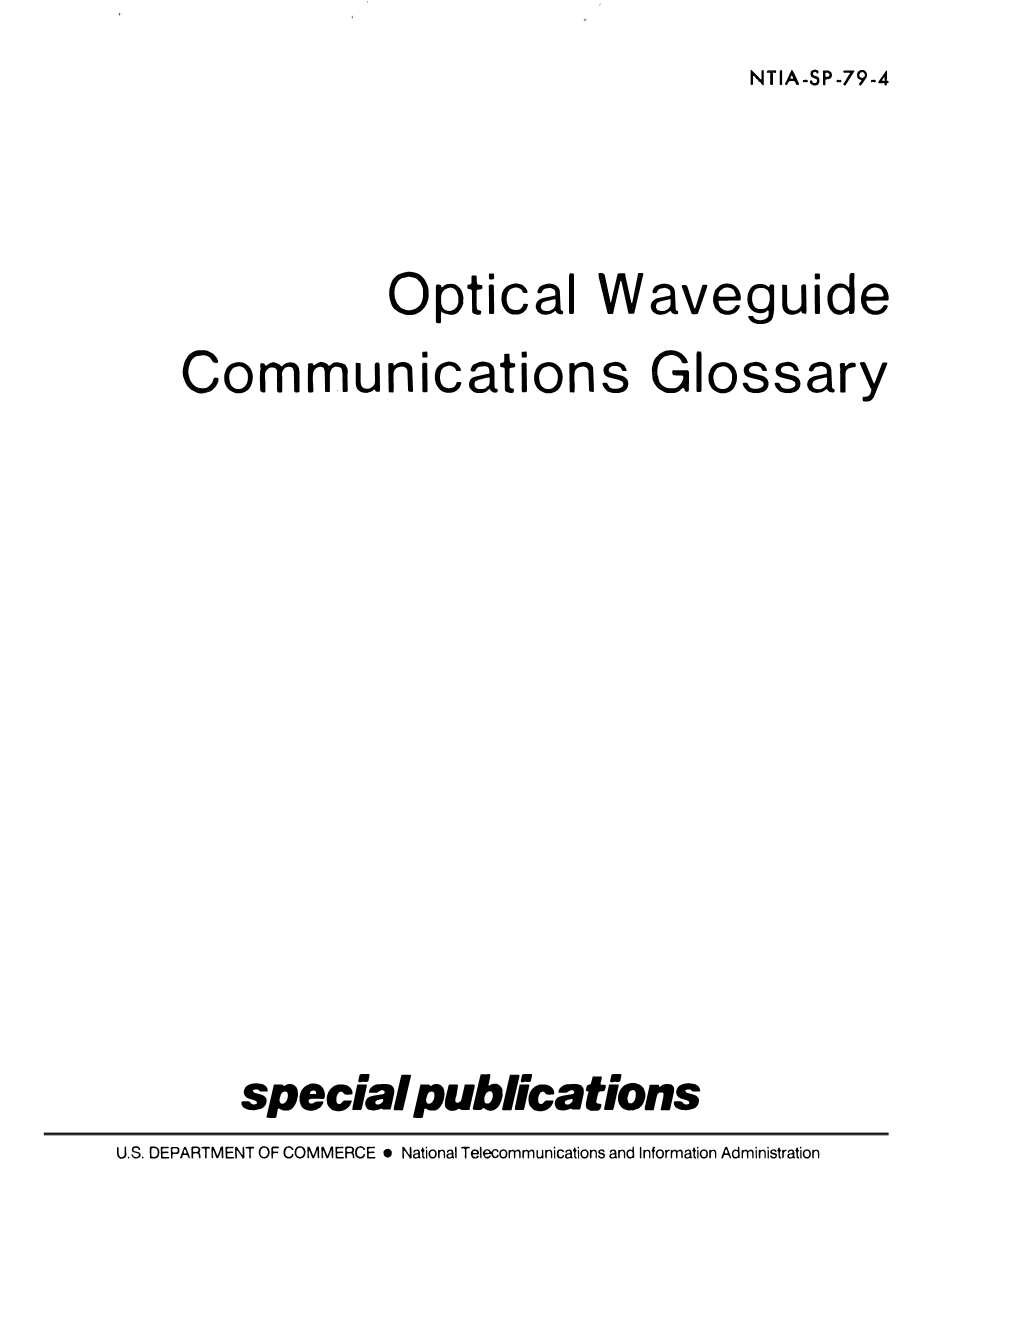 Optical Waveguide Communications Glossary